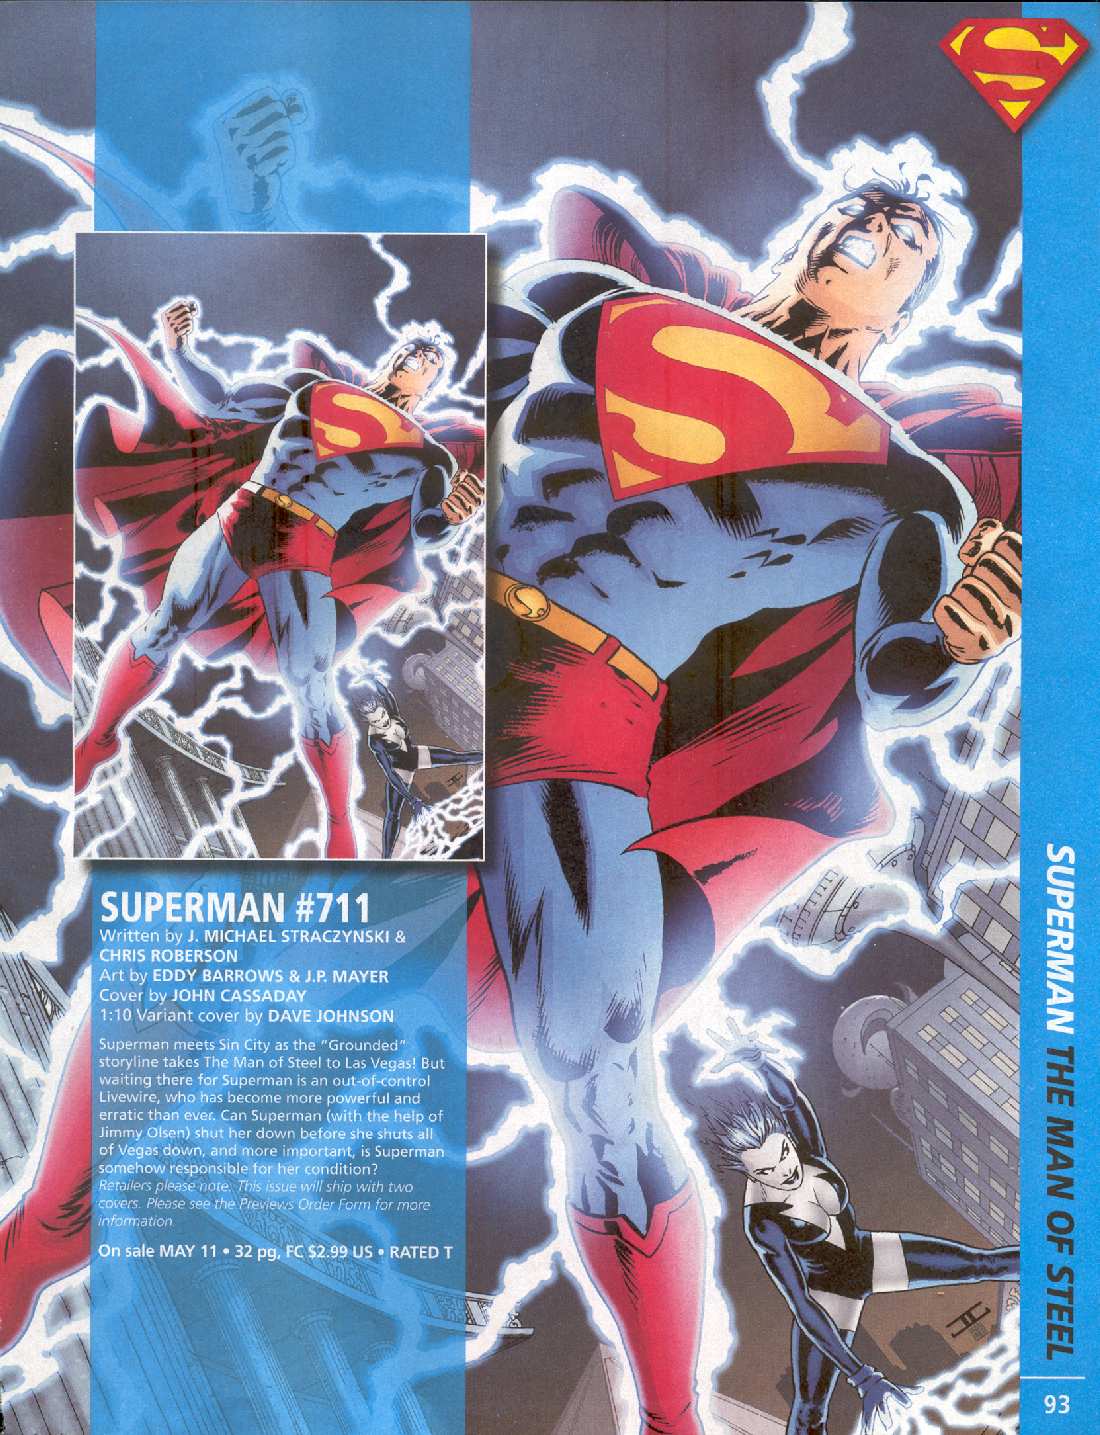 SUPERMAN #711 PREVIEW